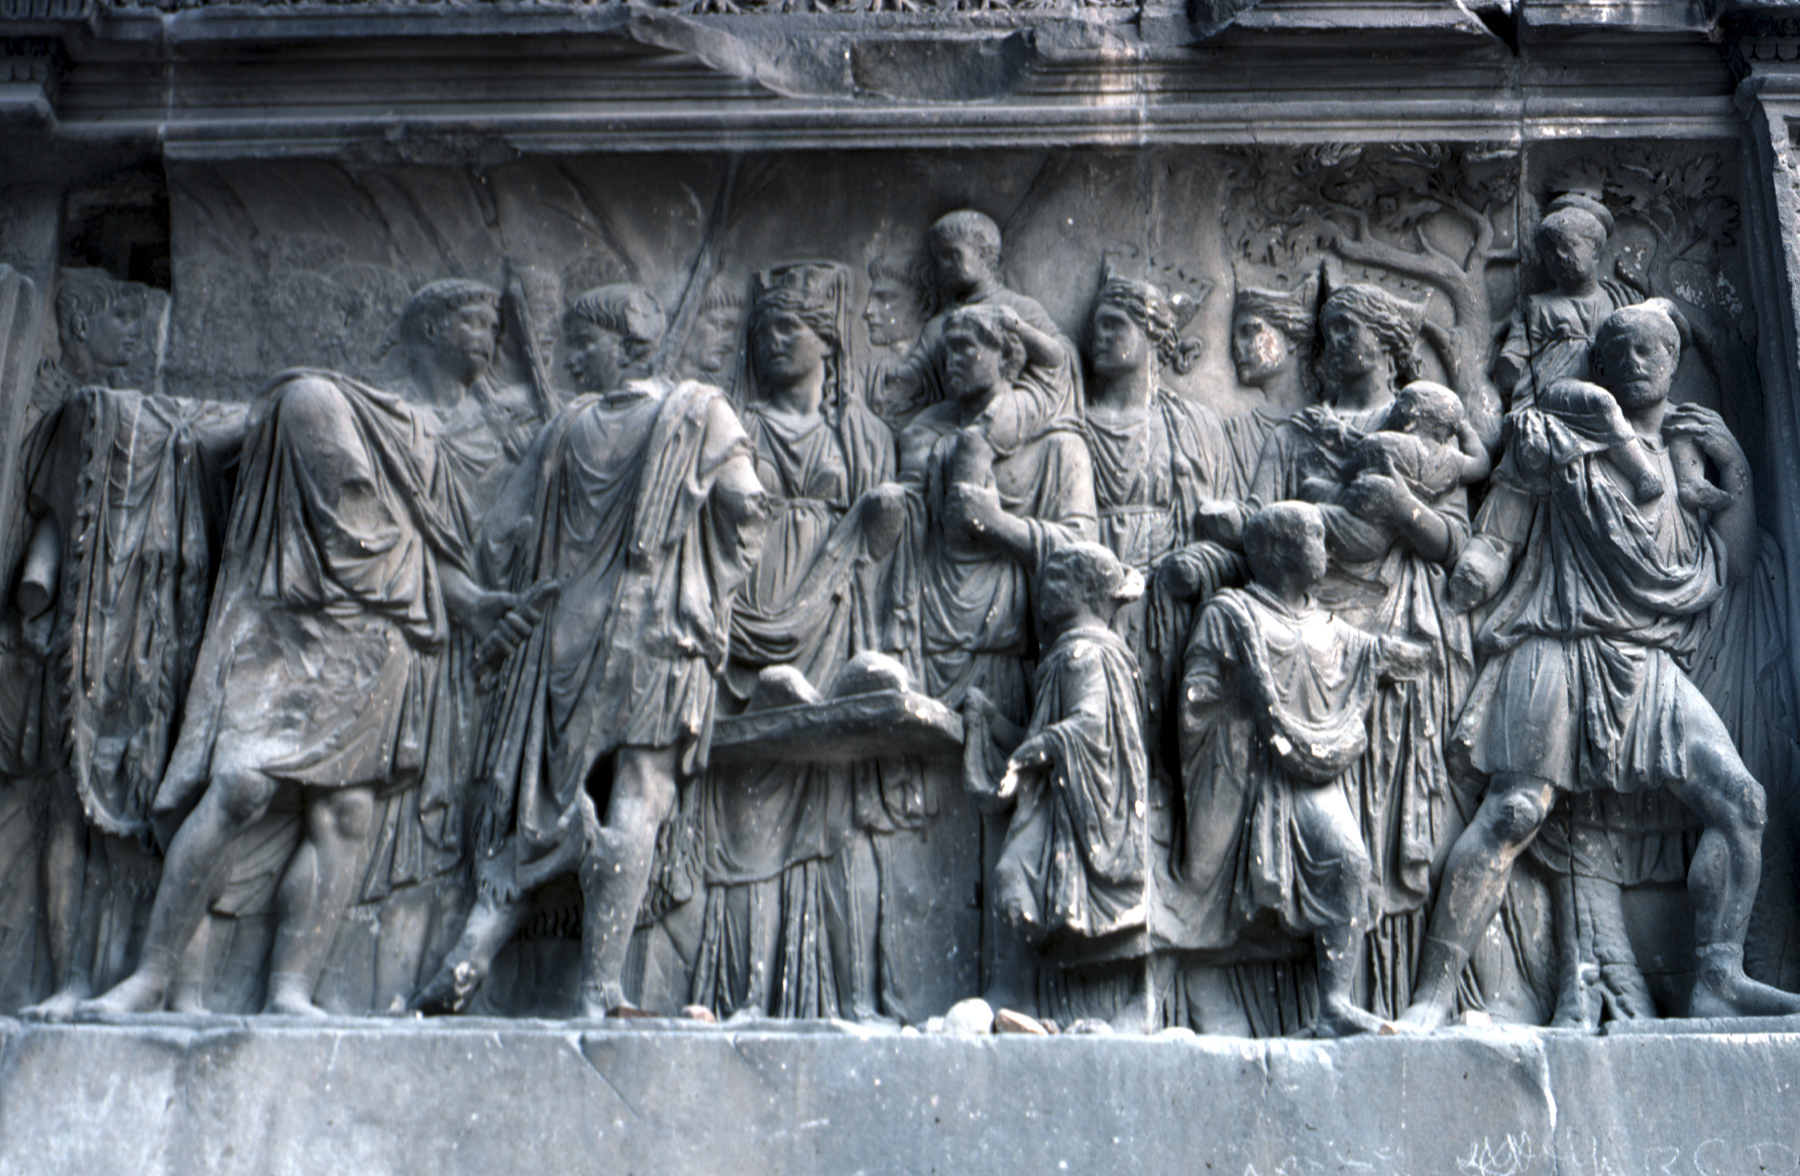 carvings on the wall of a building with people standing around